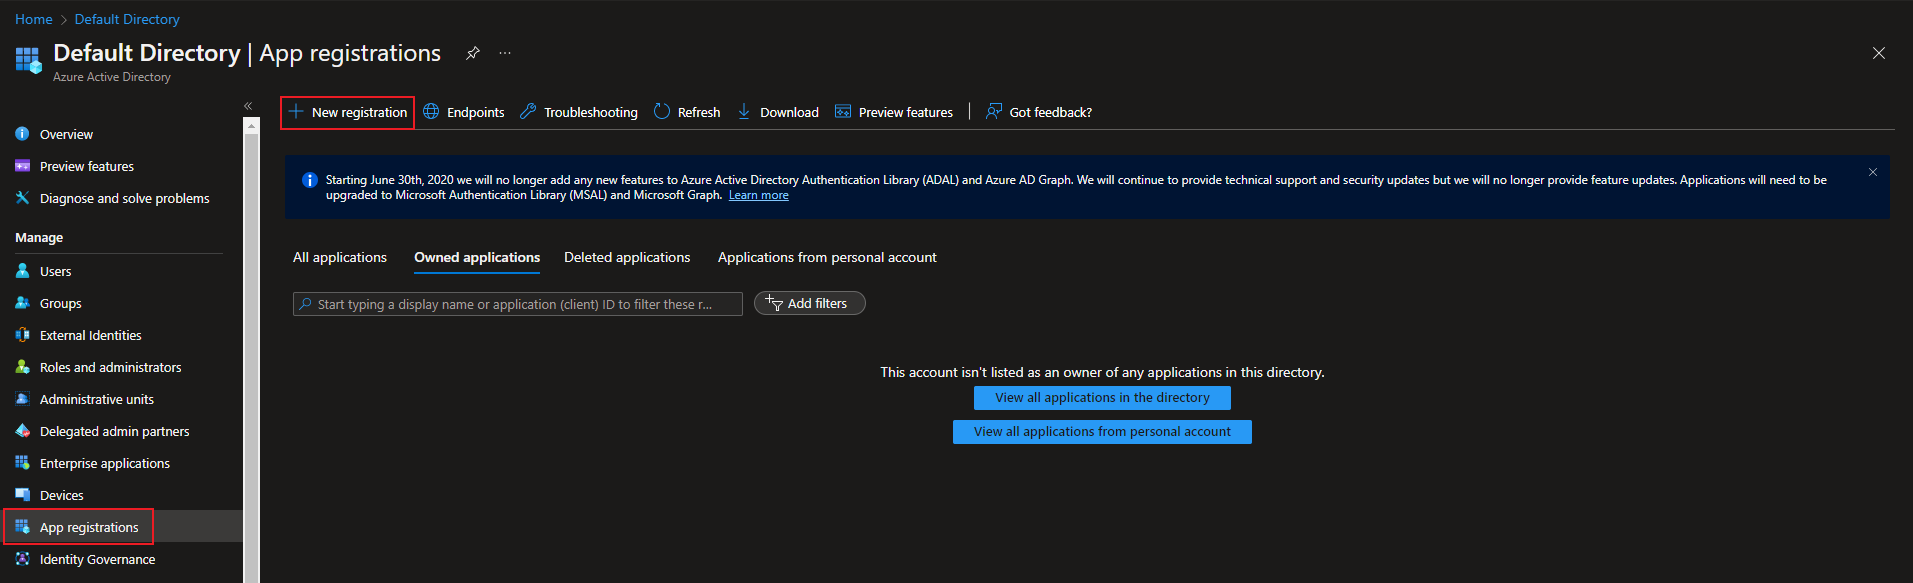 How to implement CICD for IaC in practice - part 2: How to connect your Azure Devops organization securely with an Azure subscription